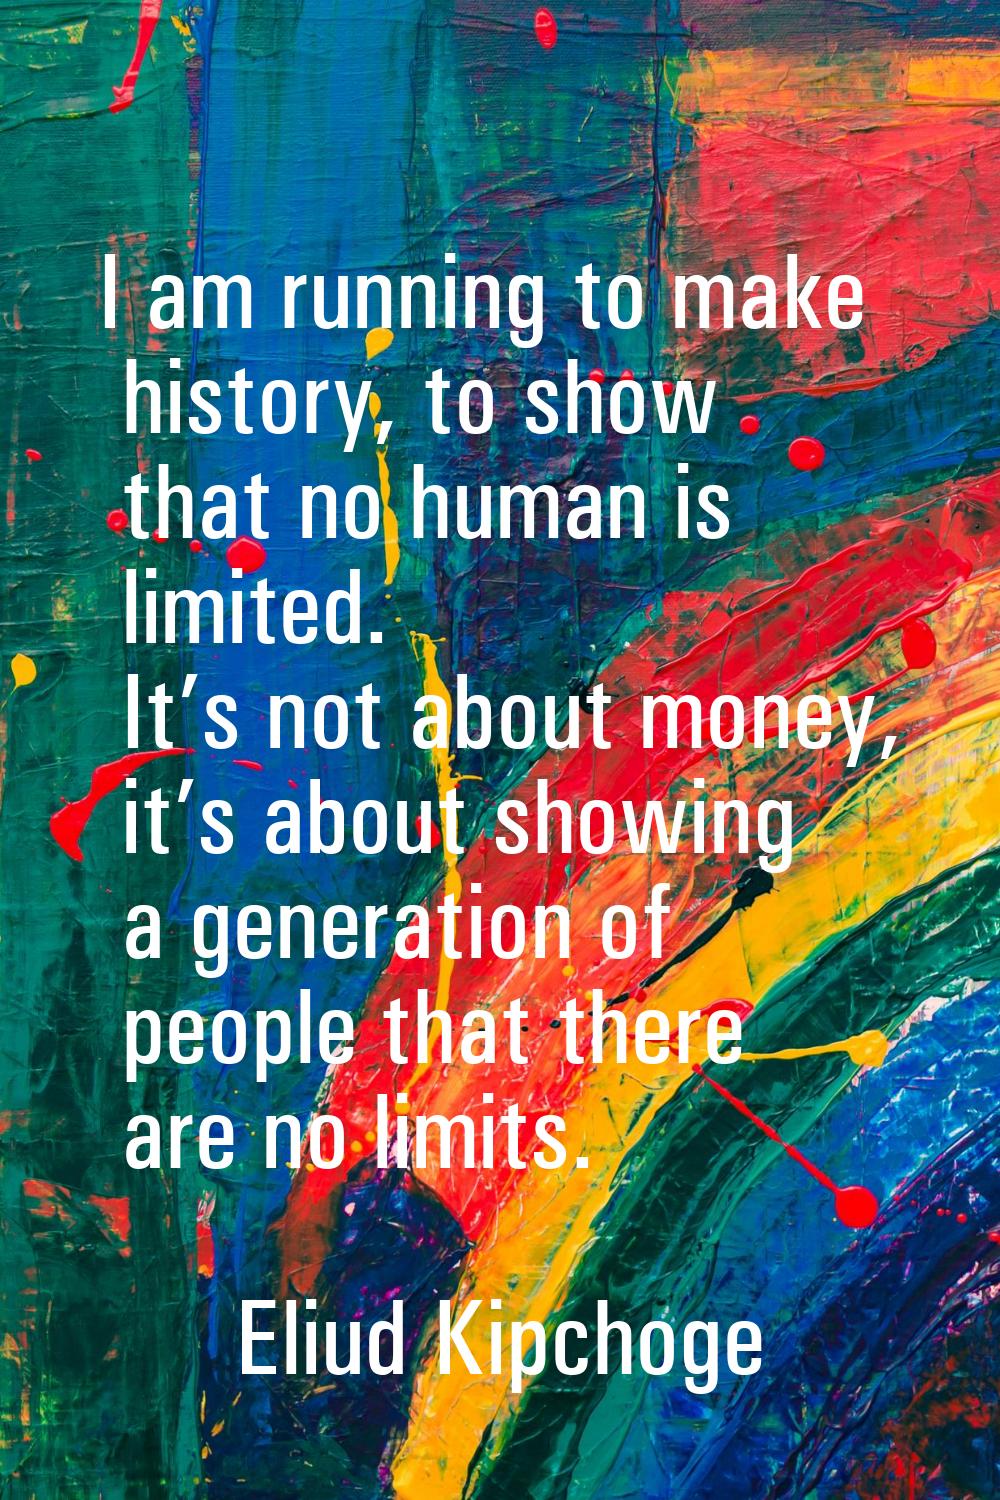 I am running to make history, to show that no human is limited. It’s not about money, it’s about sh